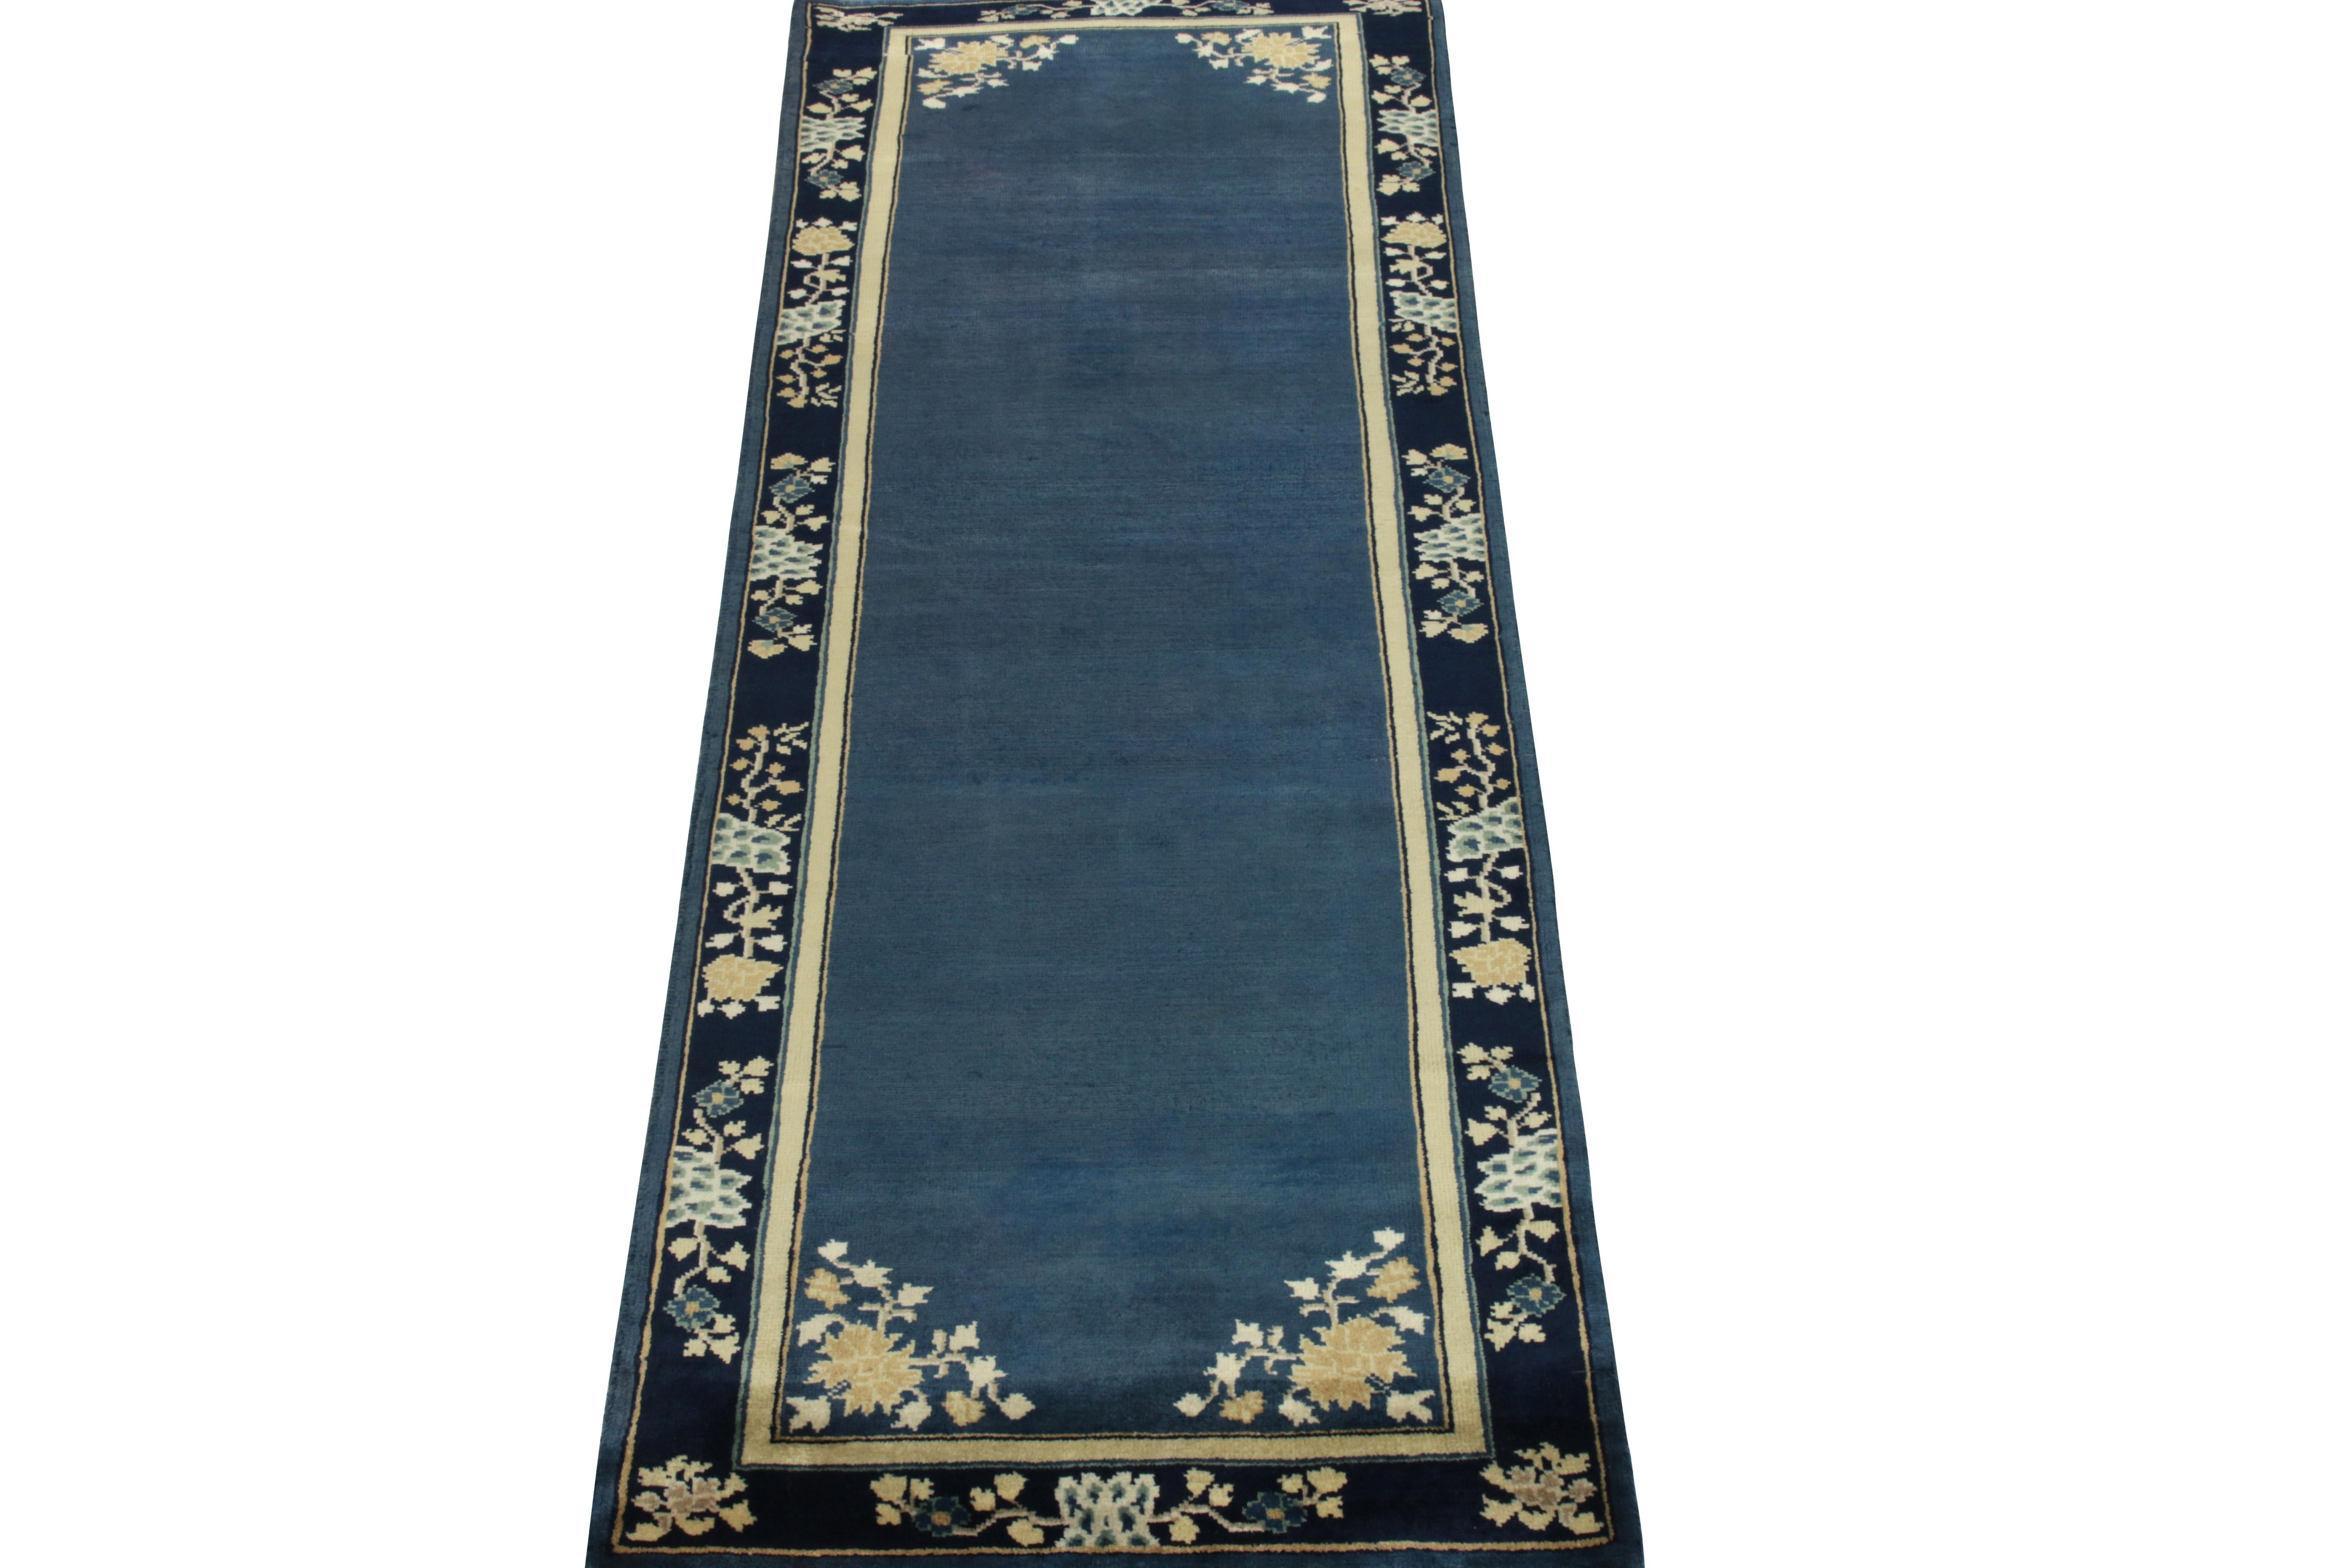 A 3x8 hand-knotted vintage runner connoting Chinese art deco inspirations of the 1920s, from the newest line of Rug & Kilim’s Antique & Vintage collection. The clean blue open field enjoys light dark spots for an interesting visual appeal on scale